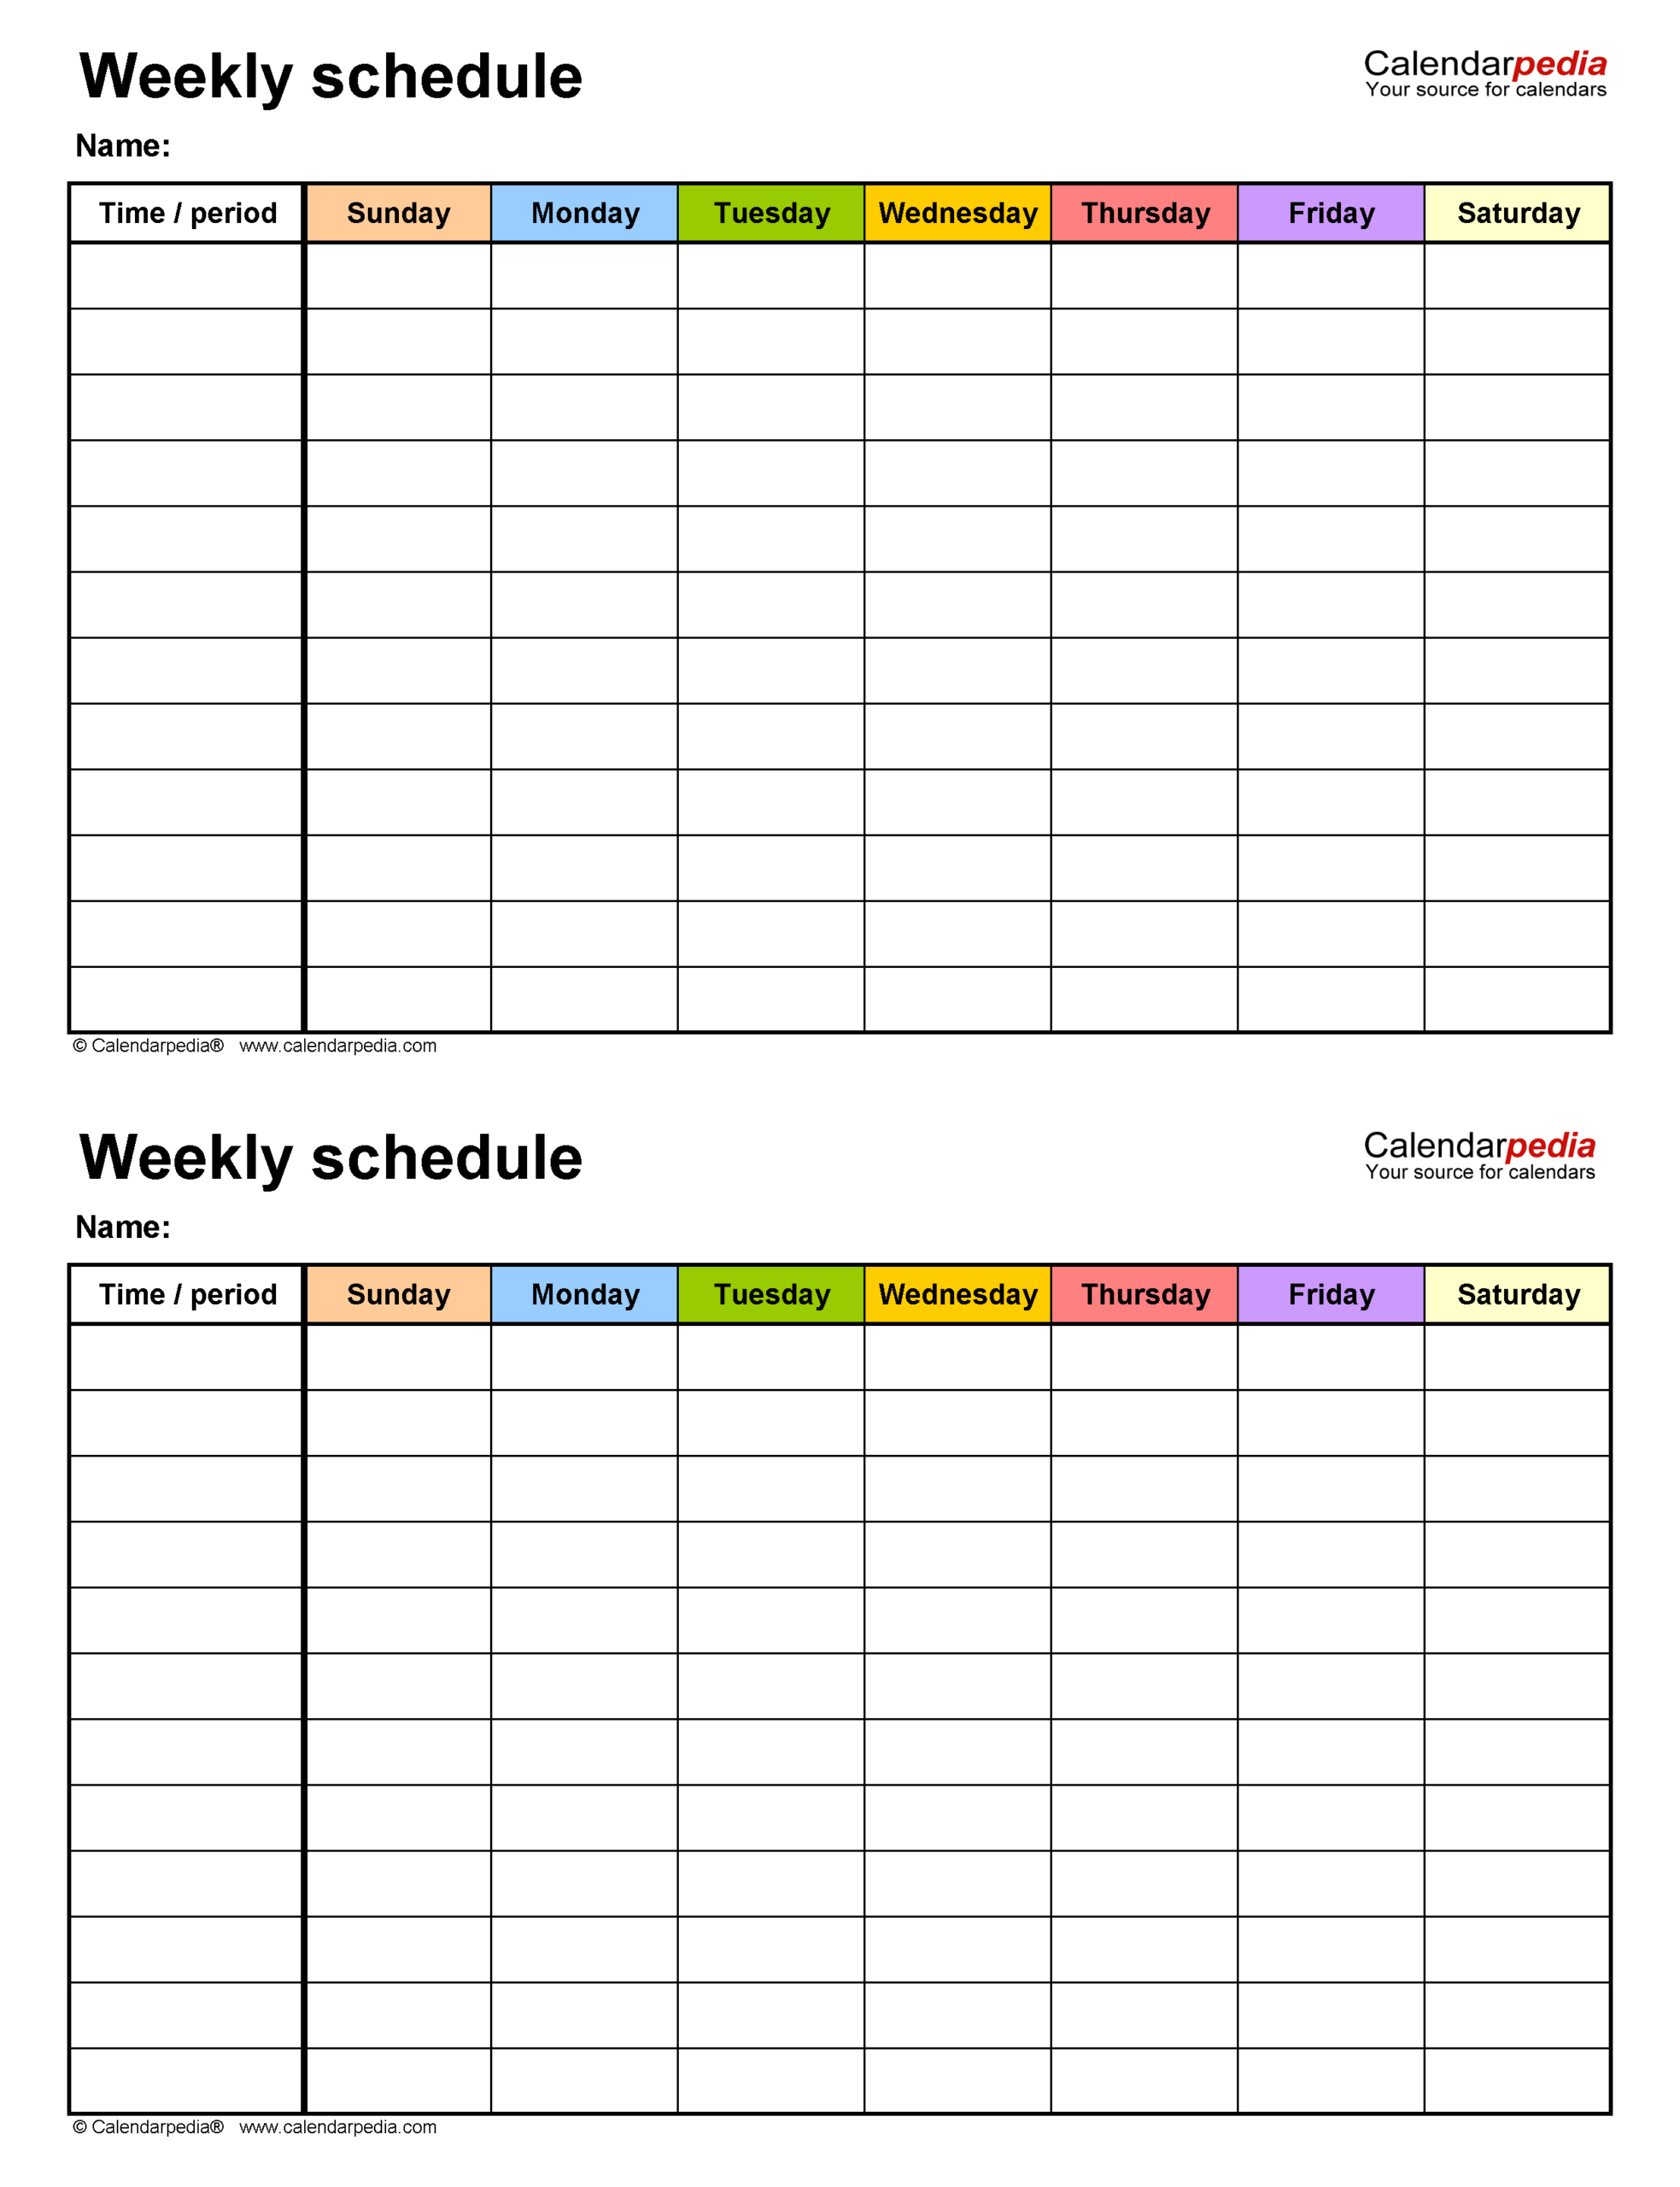 Free Weekly Schedules For Pdf - 18 Templates